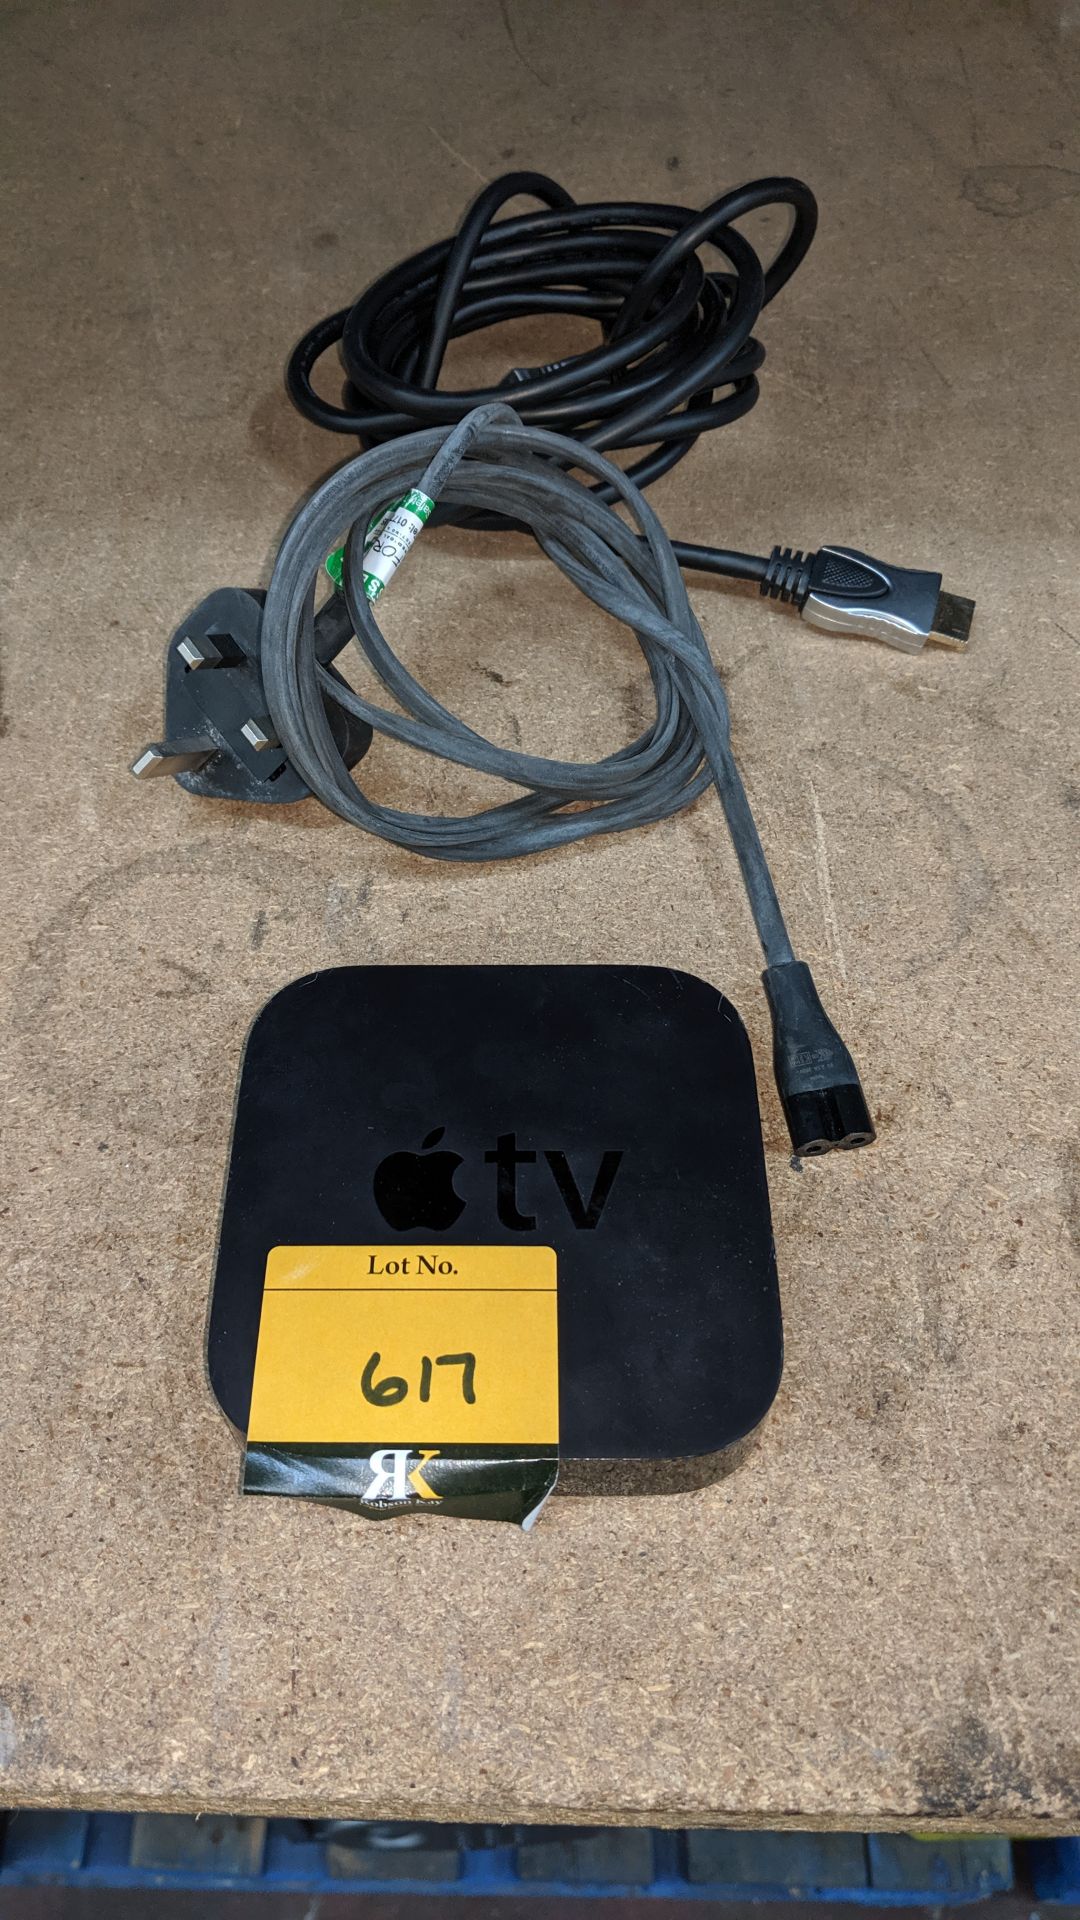 Apple TV 3rd Generation model no. A1469, including remote control, power cable & HDMI lead. This